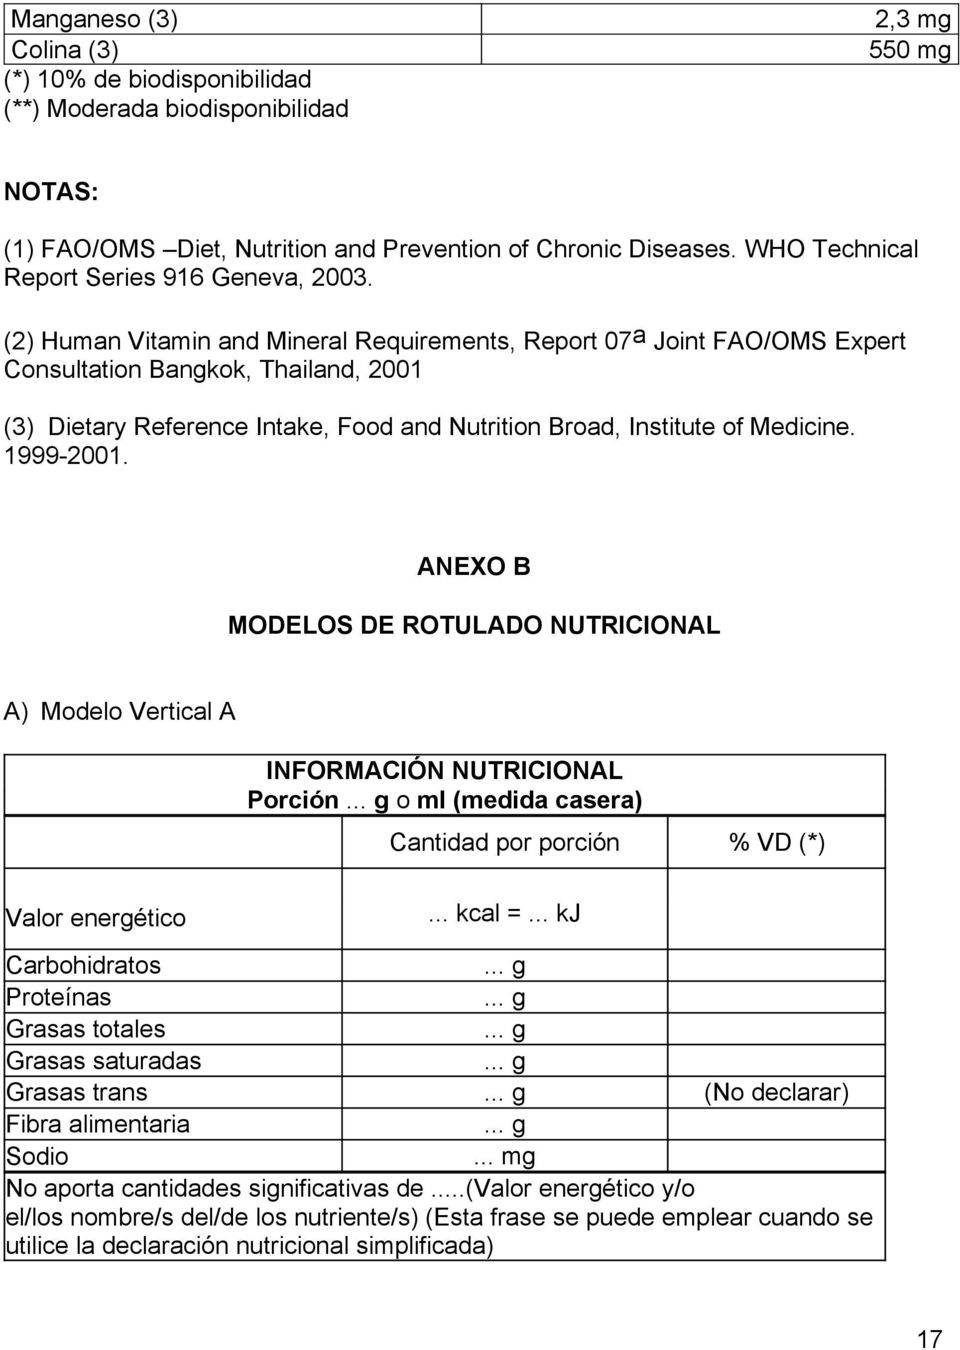 (2) Human Vitamin and Mineral Requirements, Report 07 a Joint FAO/OMS Expert Consultation Bangkok, Thailand, 2001 (3) Dietary Reference Intake, Food and Nutrition Broad, Institute of Medicine.